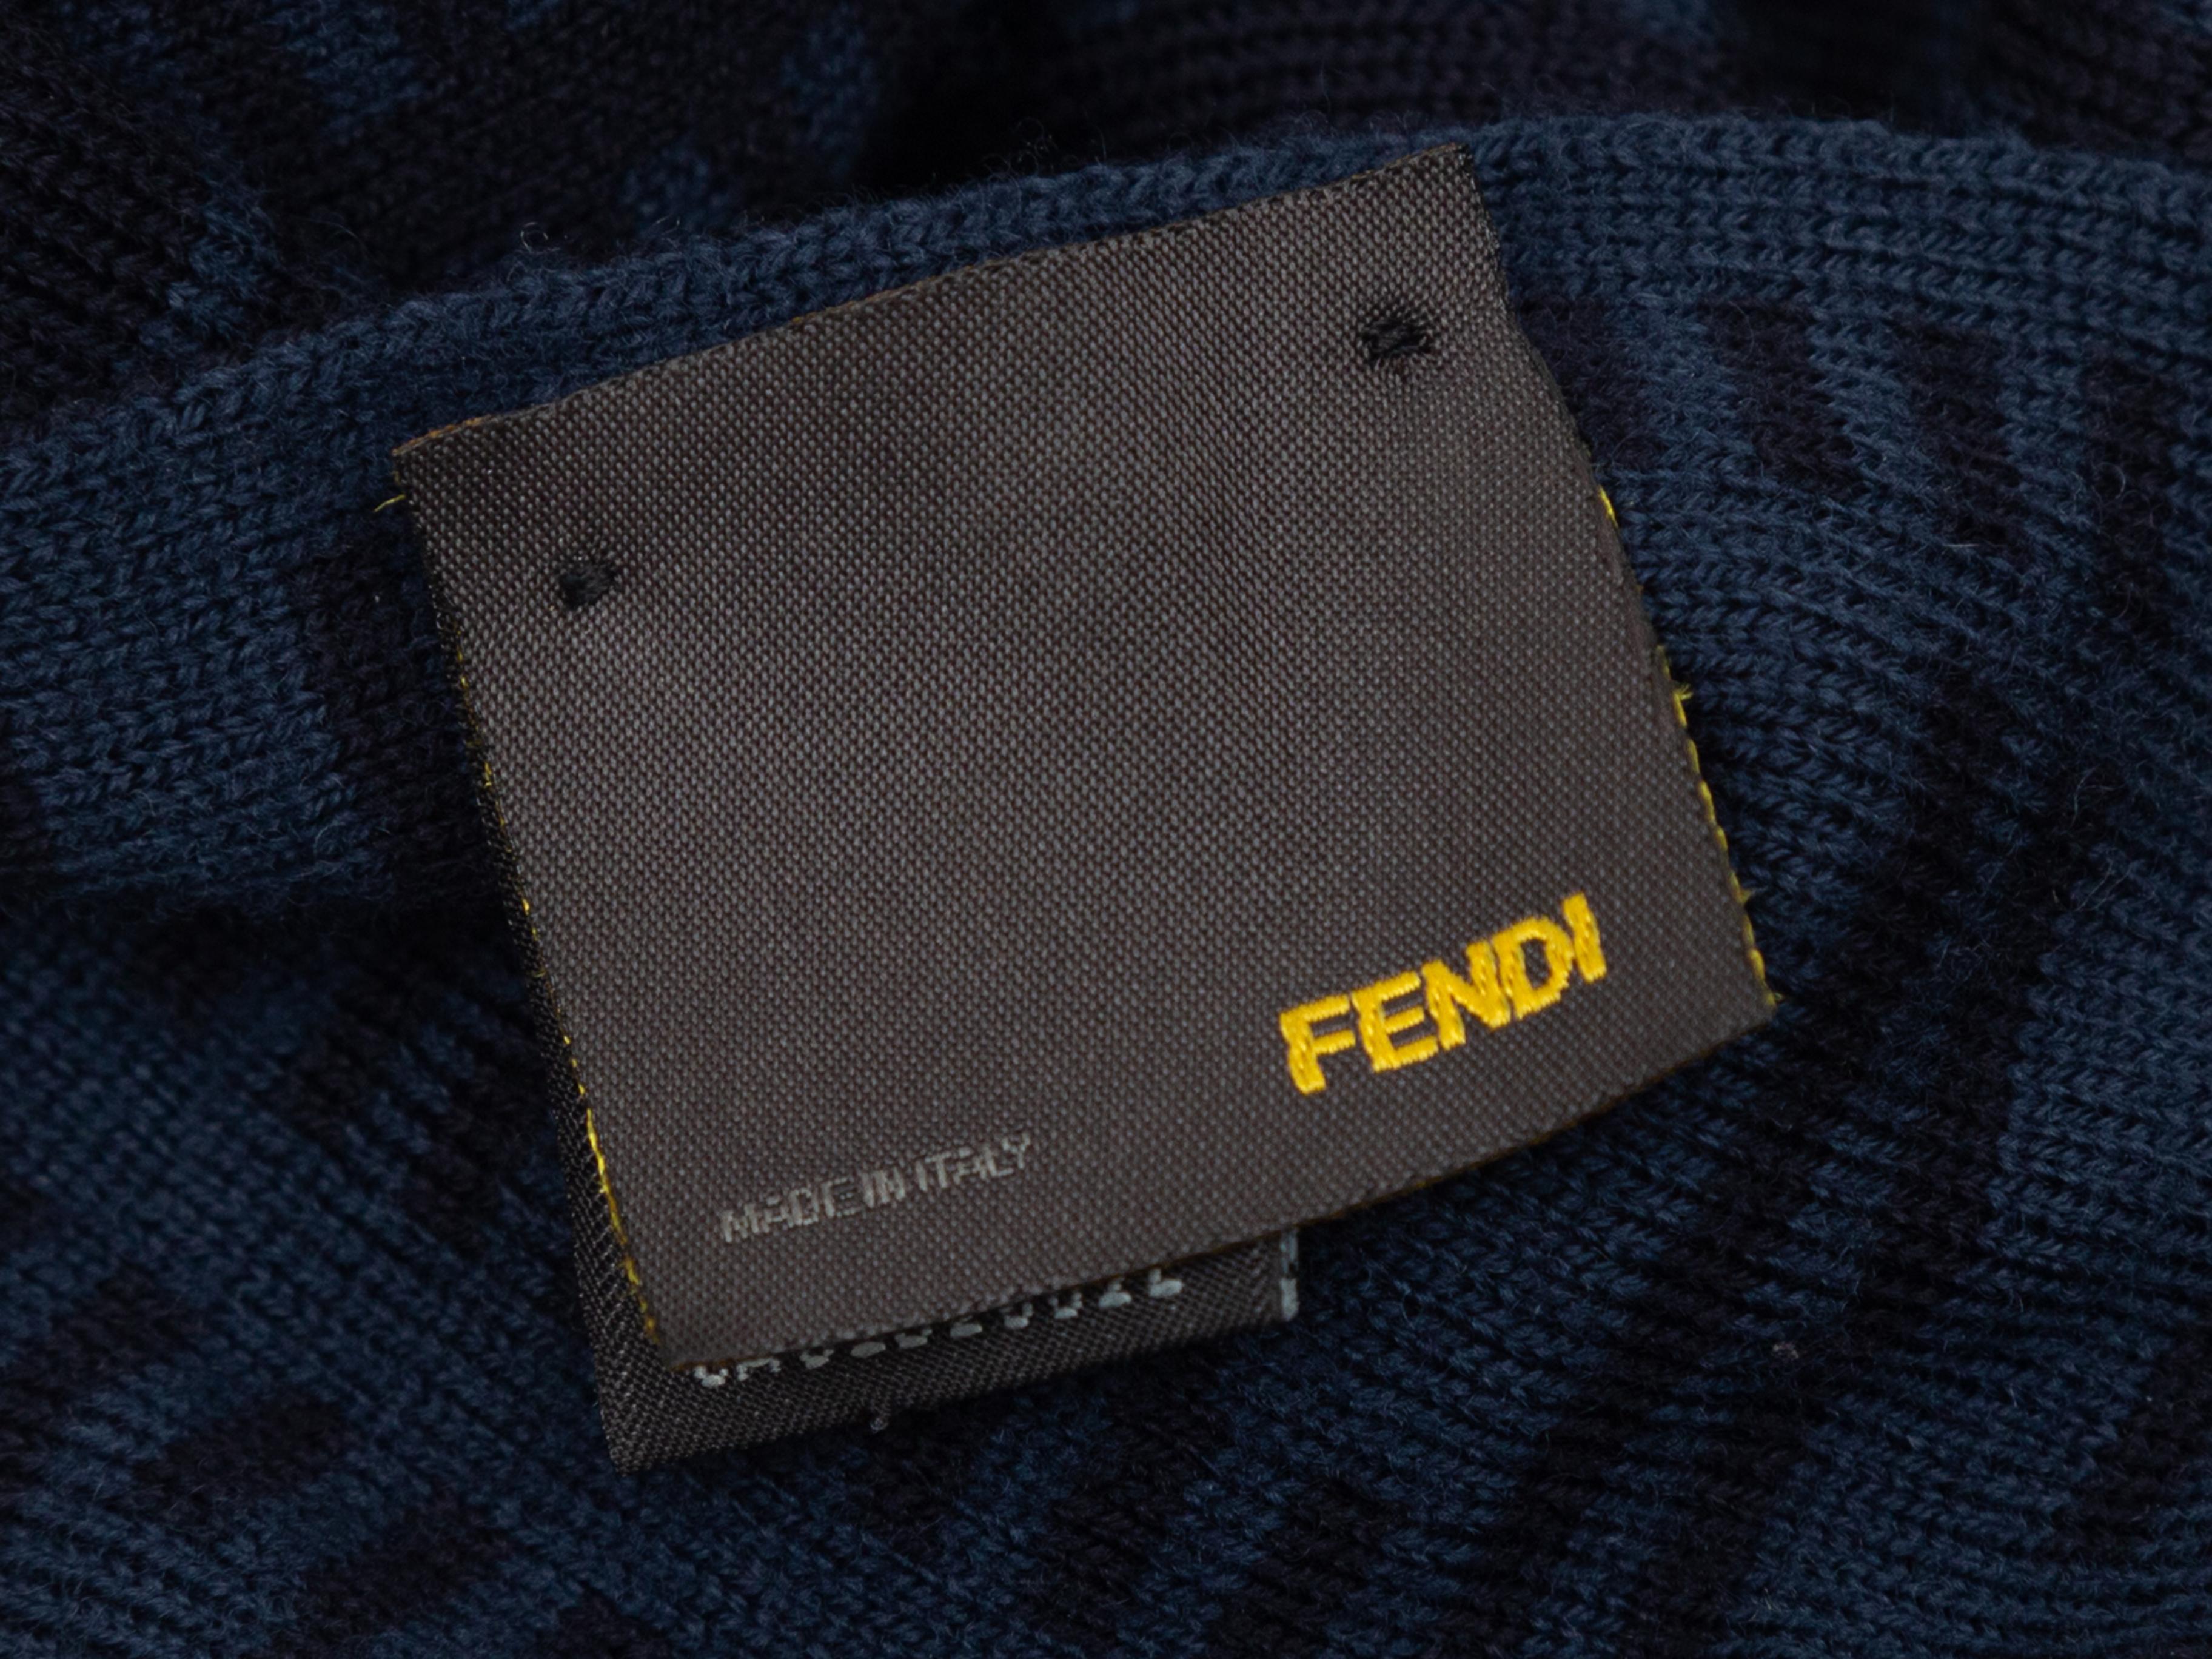 Product details: Black and navy wool scarf by Fendi. Zucca intarsia pattern throughout. 61